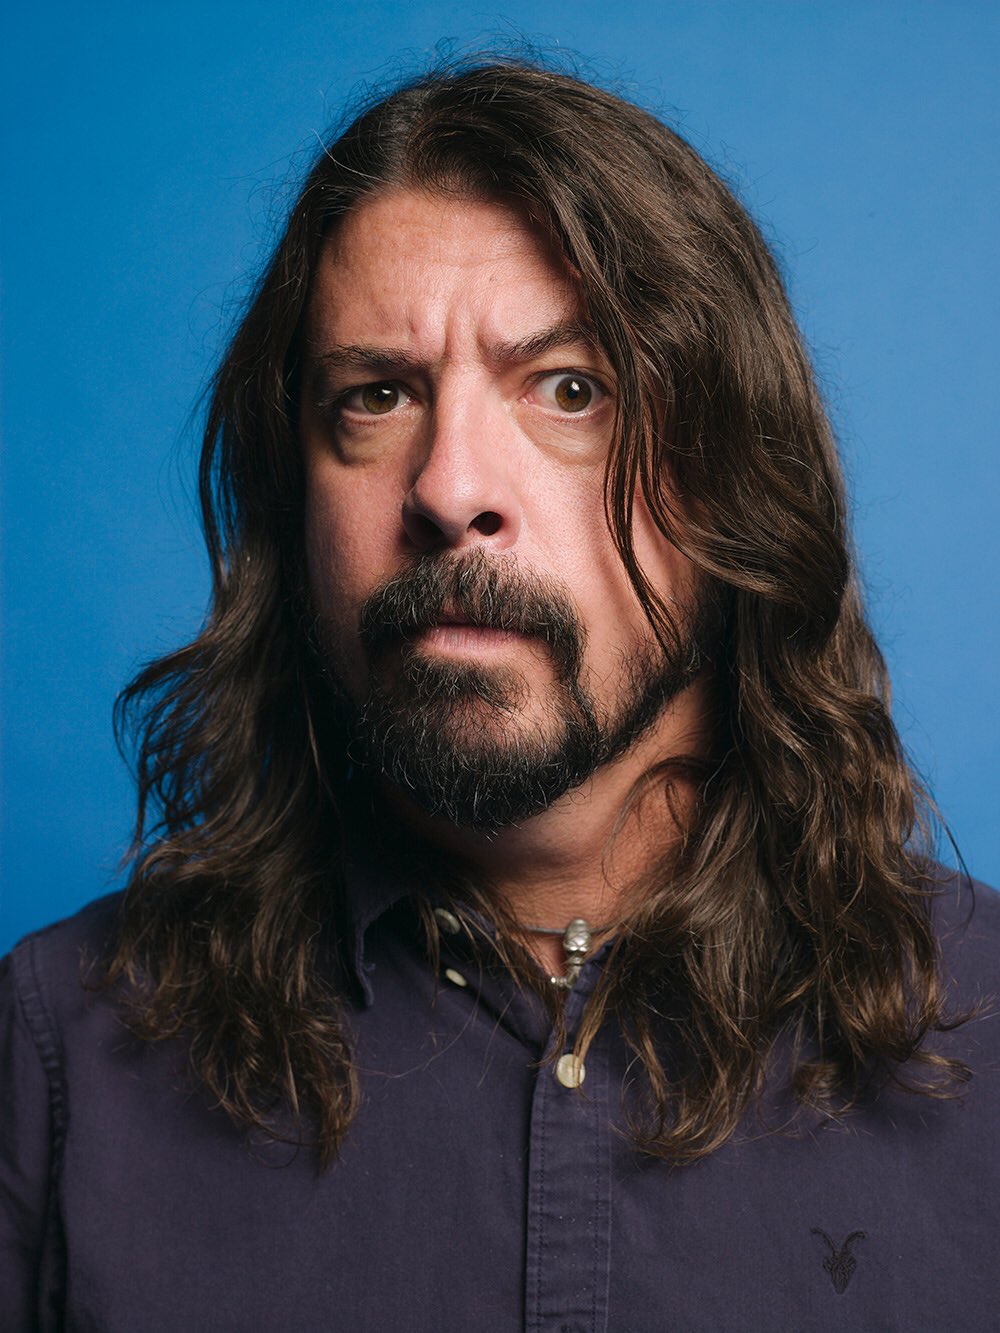 Happy Birthday to Dave Grohl from The Foo Fighters born Jan 14th 1969 